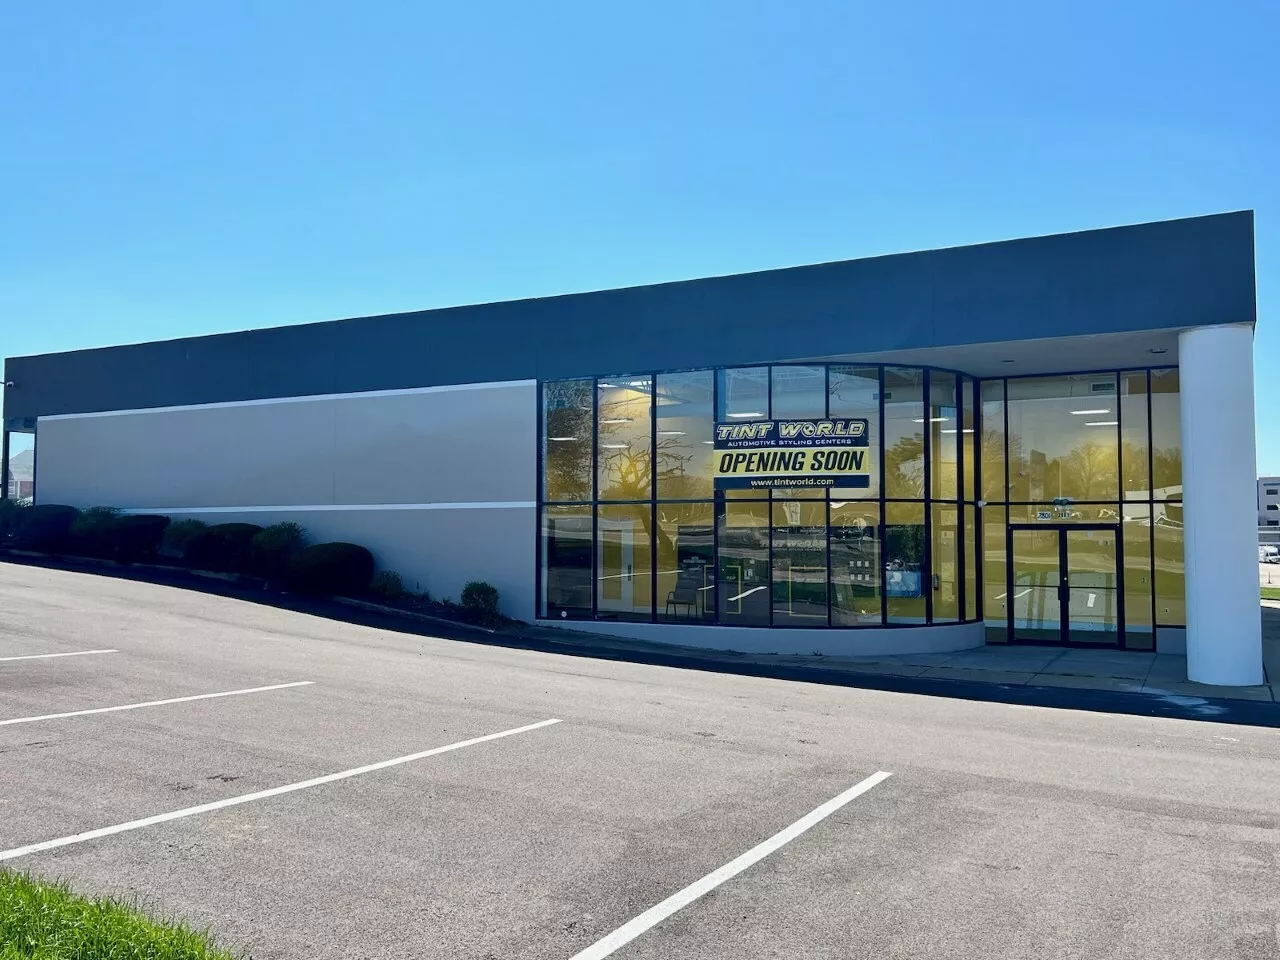 Tint World® Automotive Styling Centers™, a leading auto accessory and window tinting franchise, has just opened THE first of three planned locations in the state of Missouri. img#1